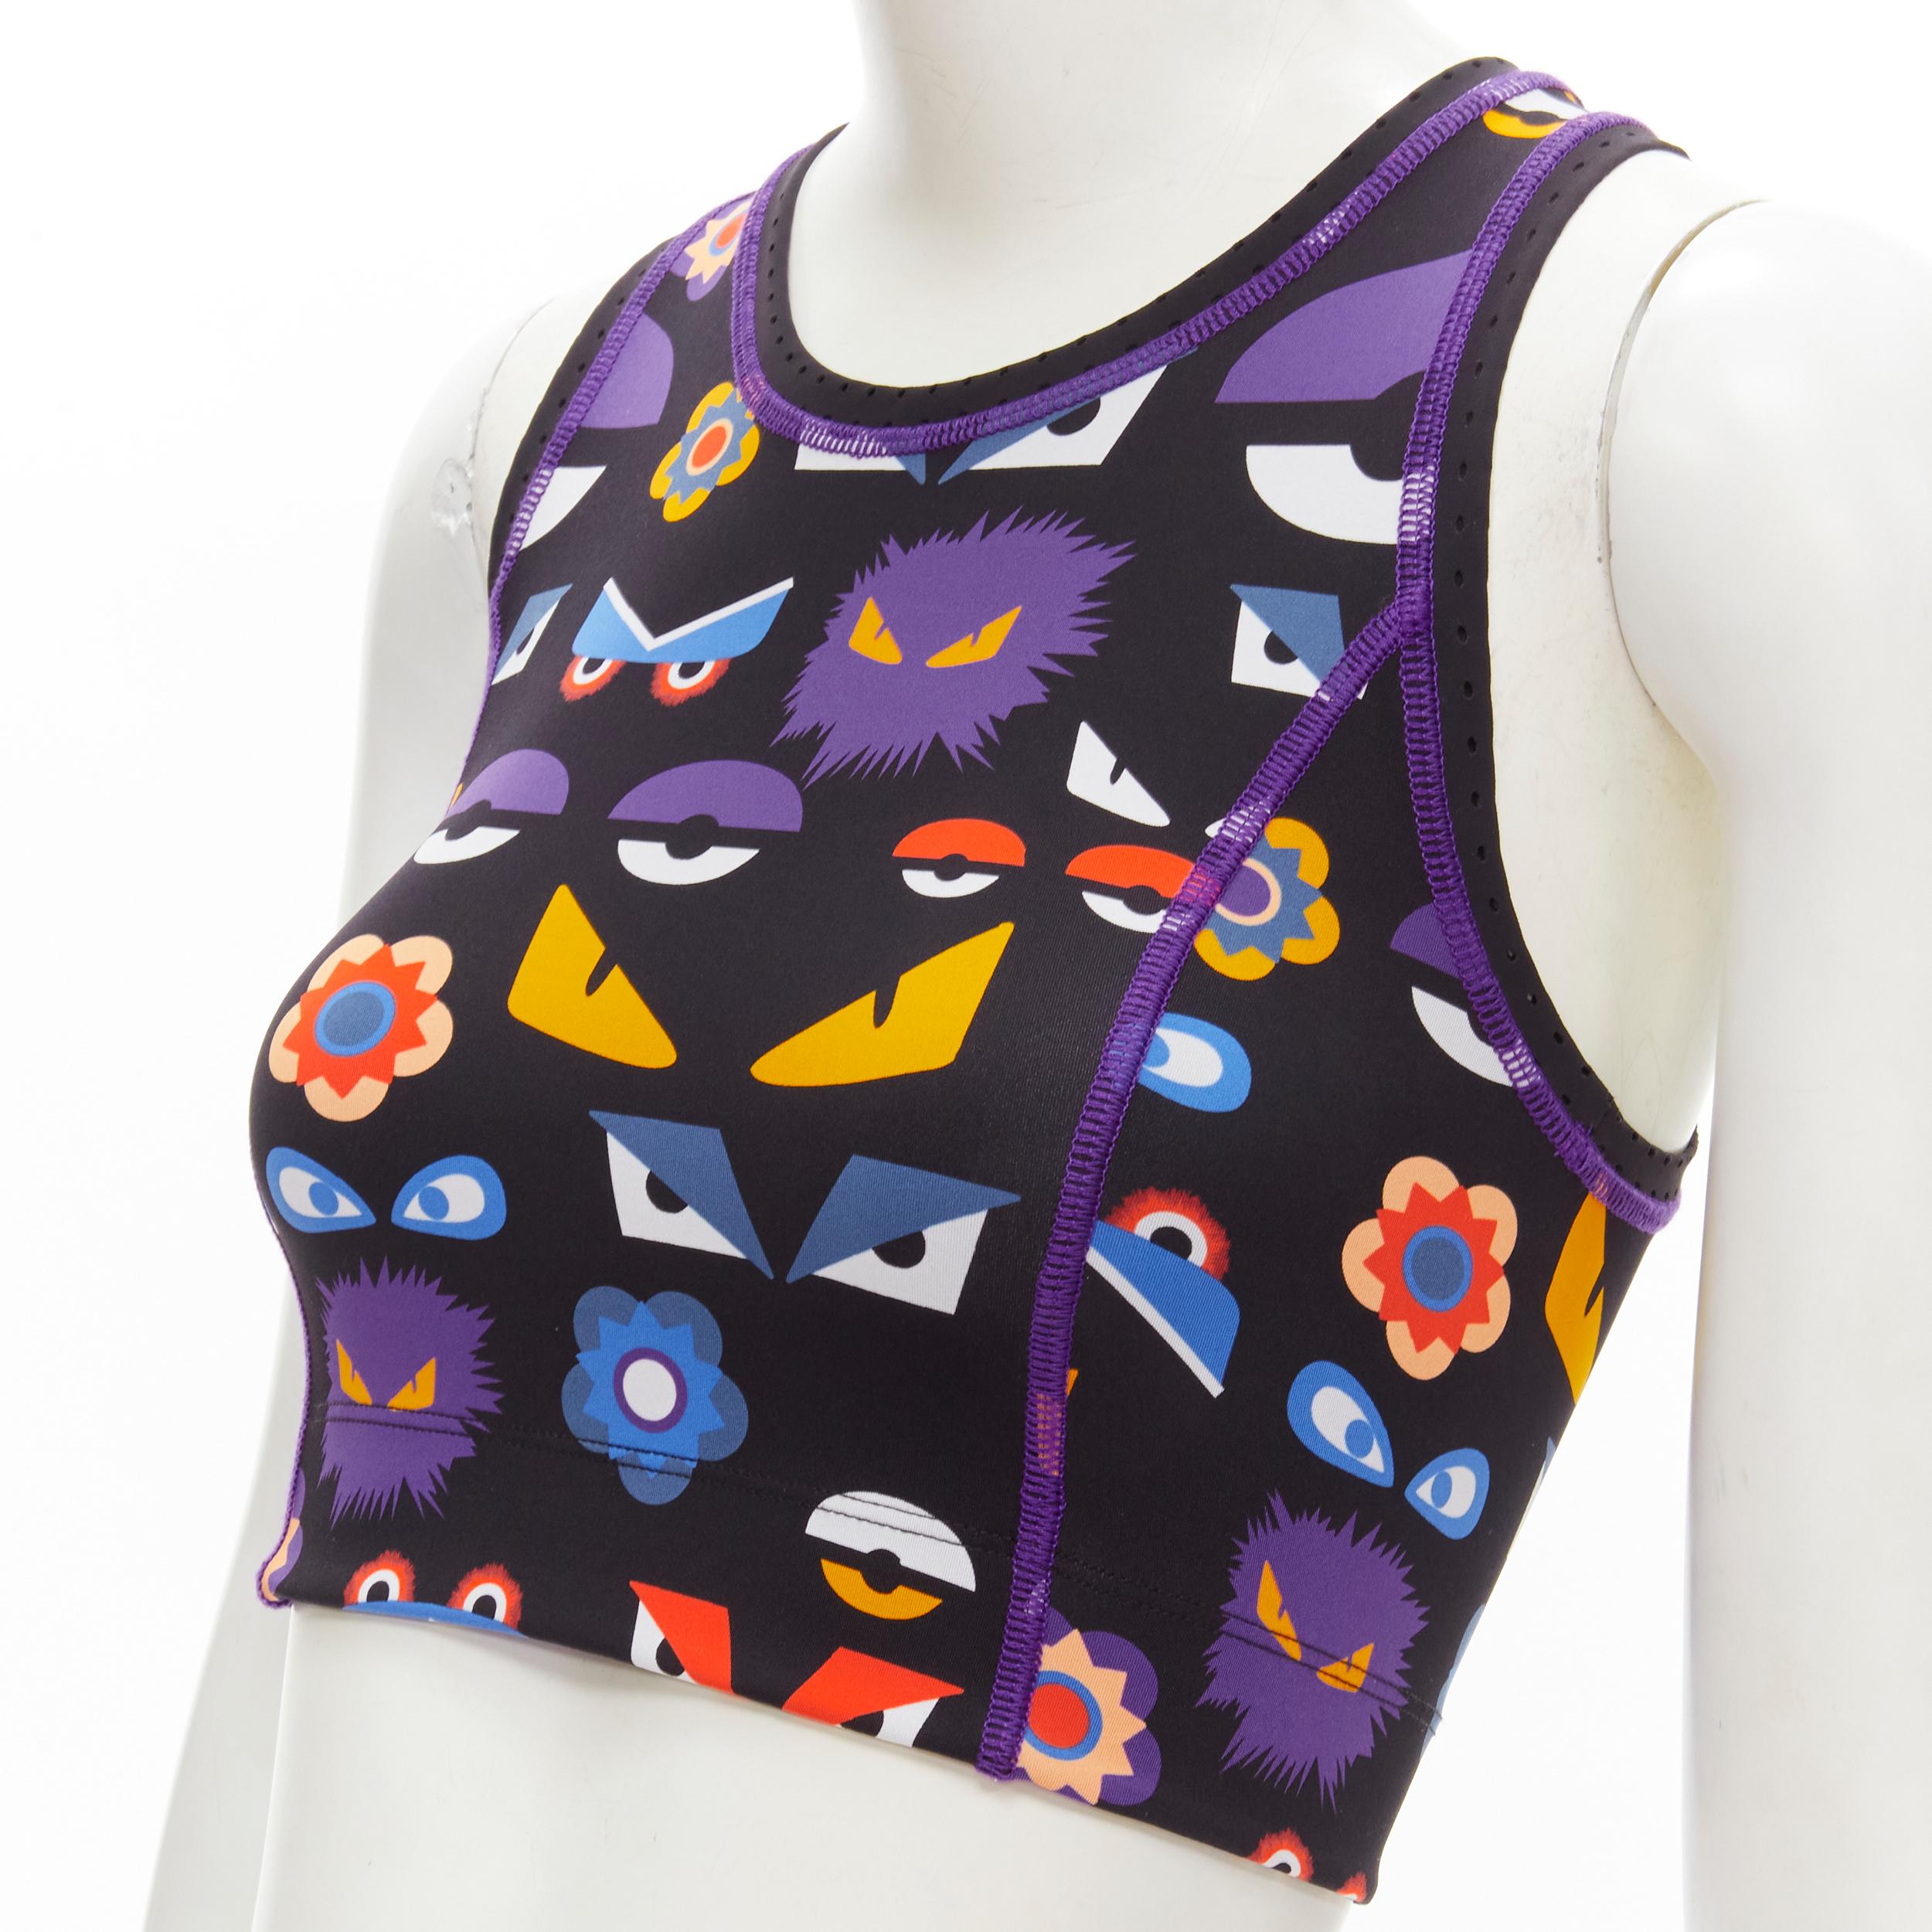 FENDI Activewear Monster Bug Eye black graphic print perforated crop top
Brand: Fendi
Material: Feels like polyester
Color: Black
Pattern: Graphic
Extra Detail: Purple overlock stitching. Perforated trim.

CONDITION:
Condition: Excellent, this item